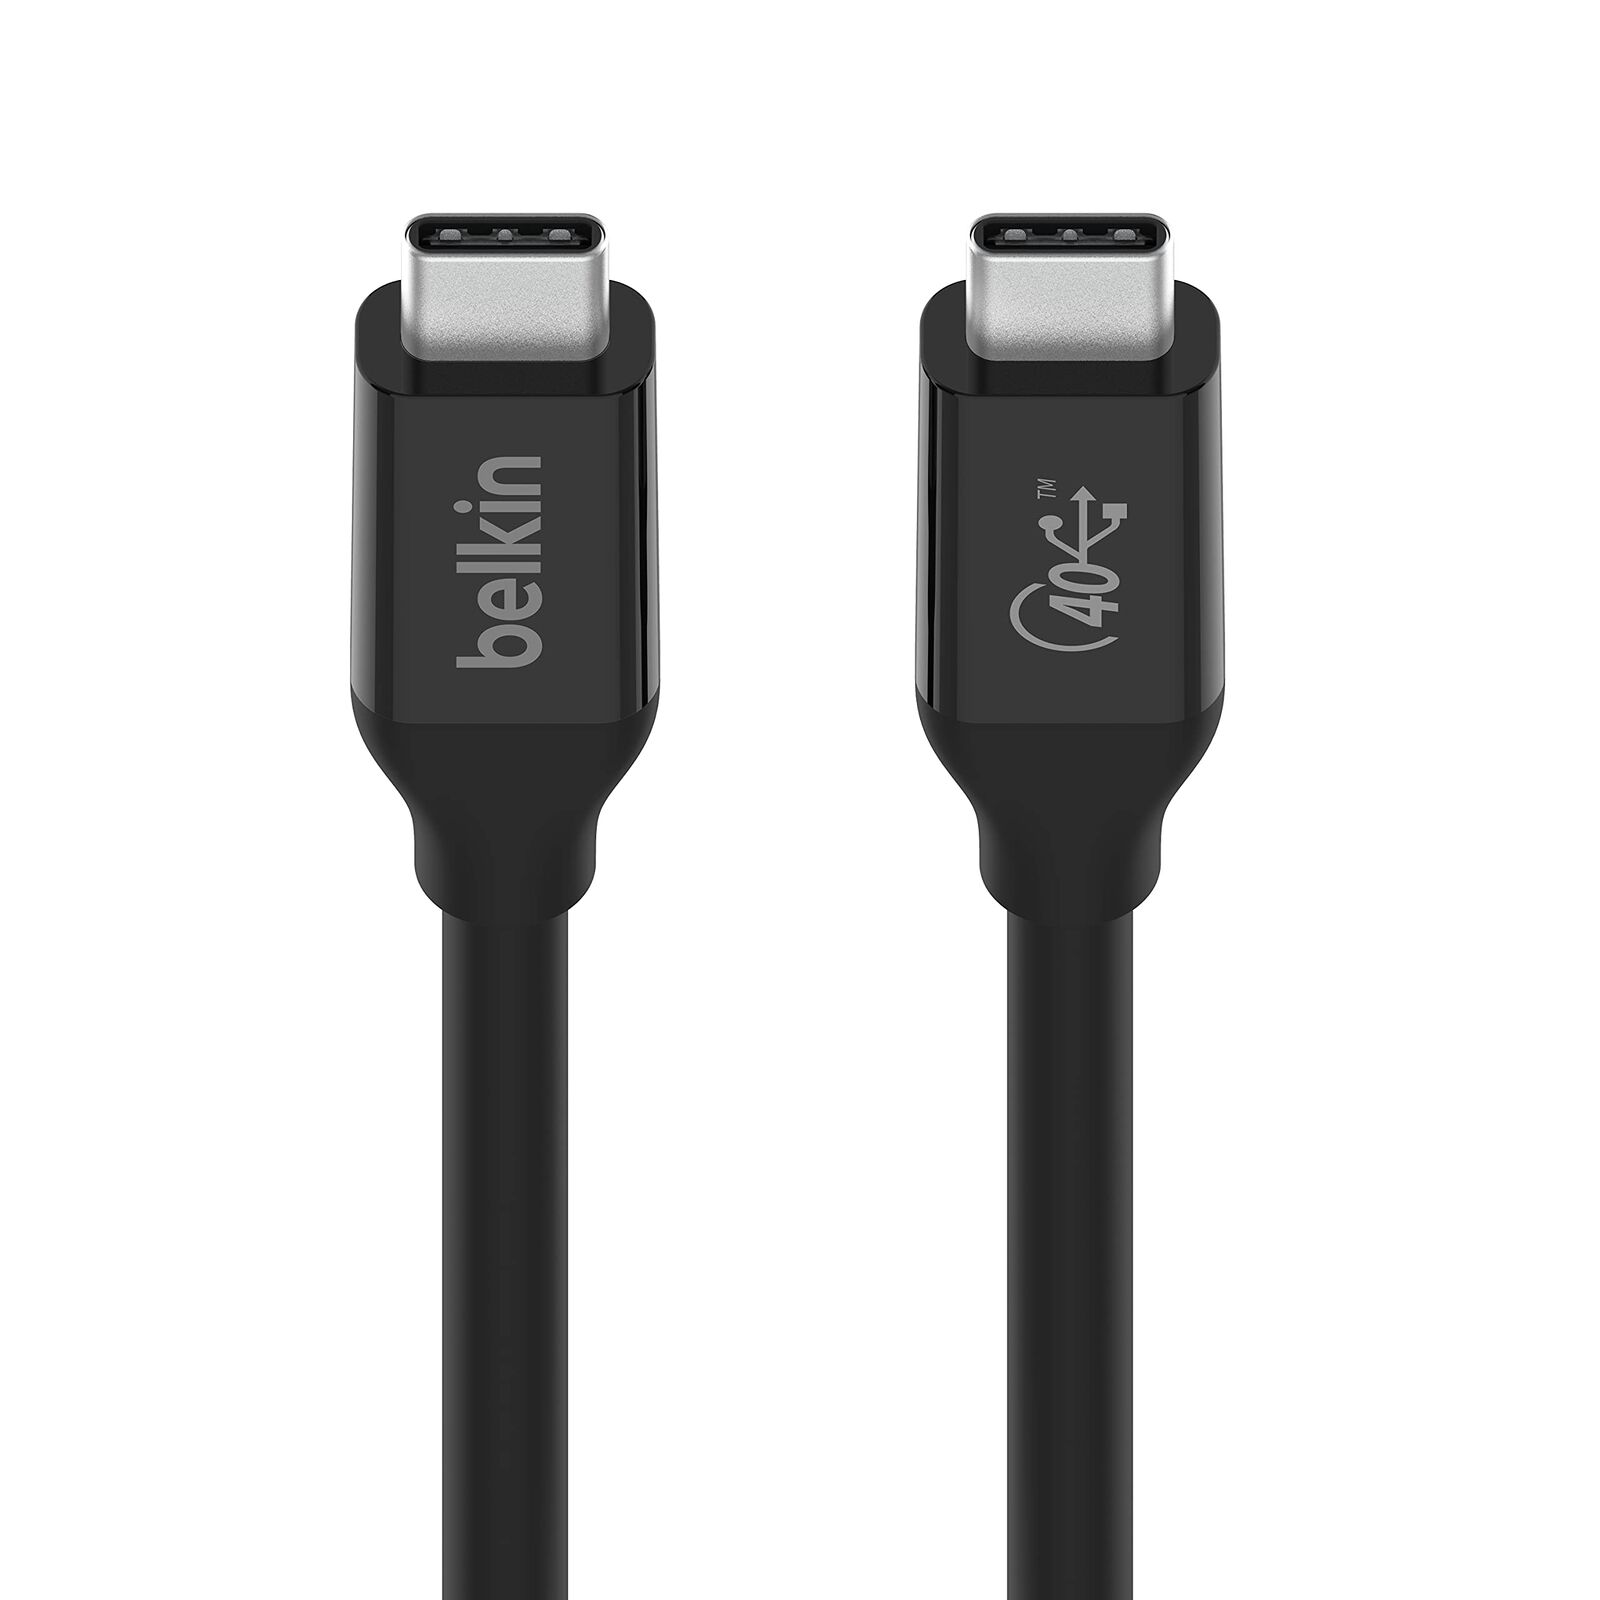 Belkin USB4 USB C to USB C Cable 2.6ft (USB IF Certified with Power Delivery up 